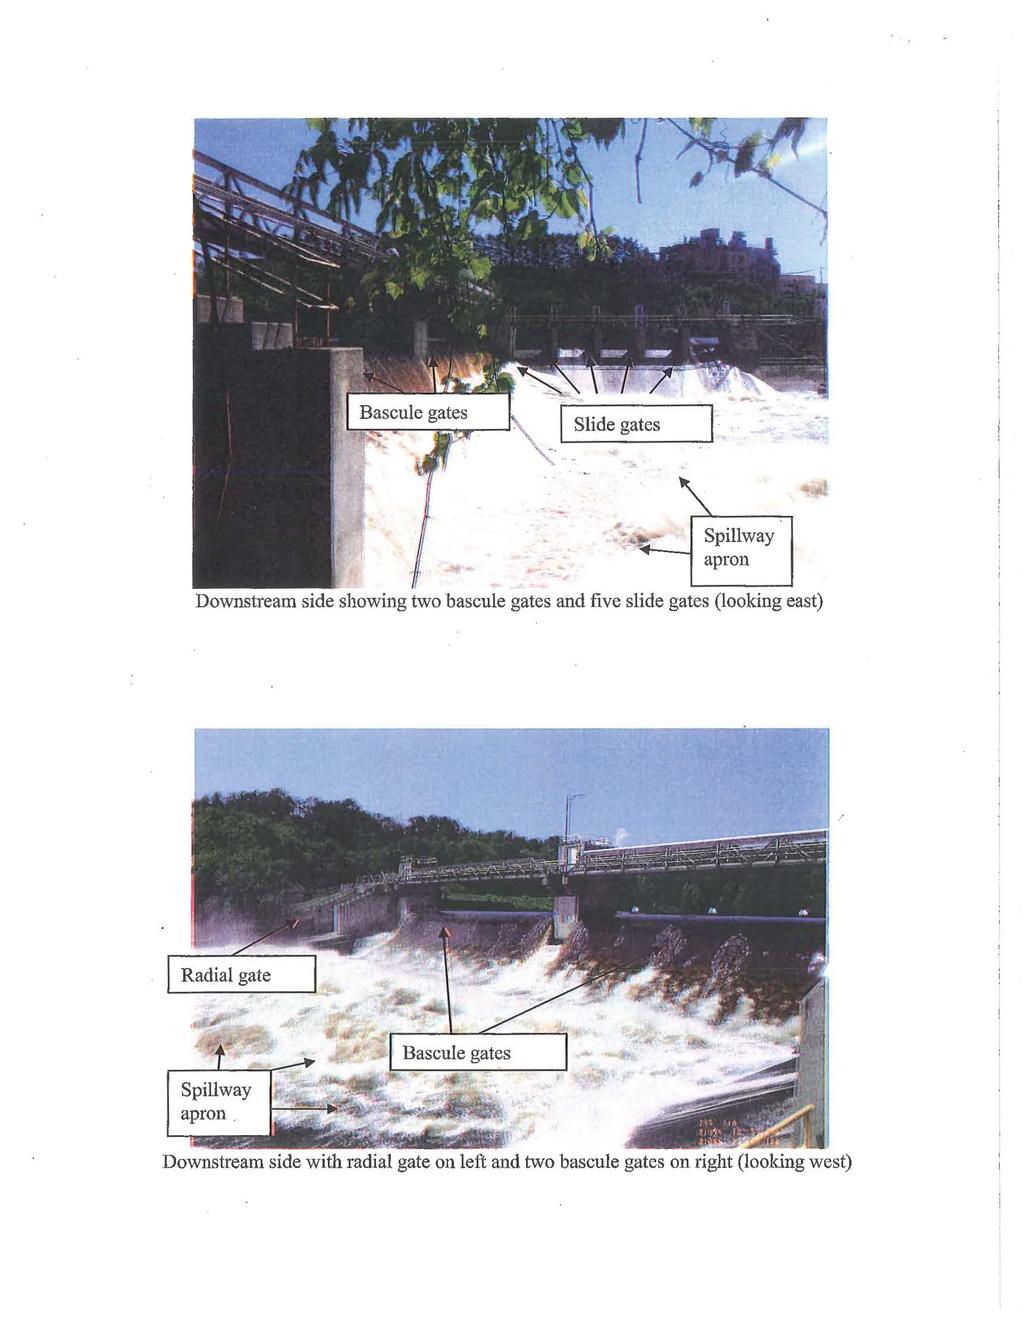 Spillway apron Downstream side showing two bascule gates and five slide gates (looking east)